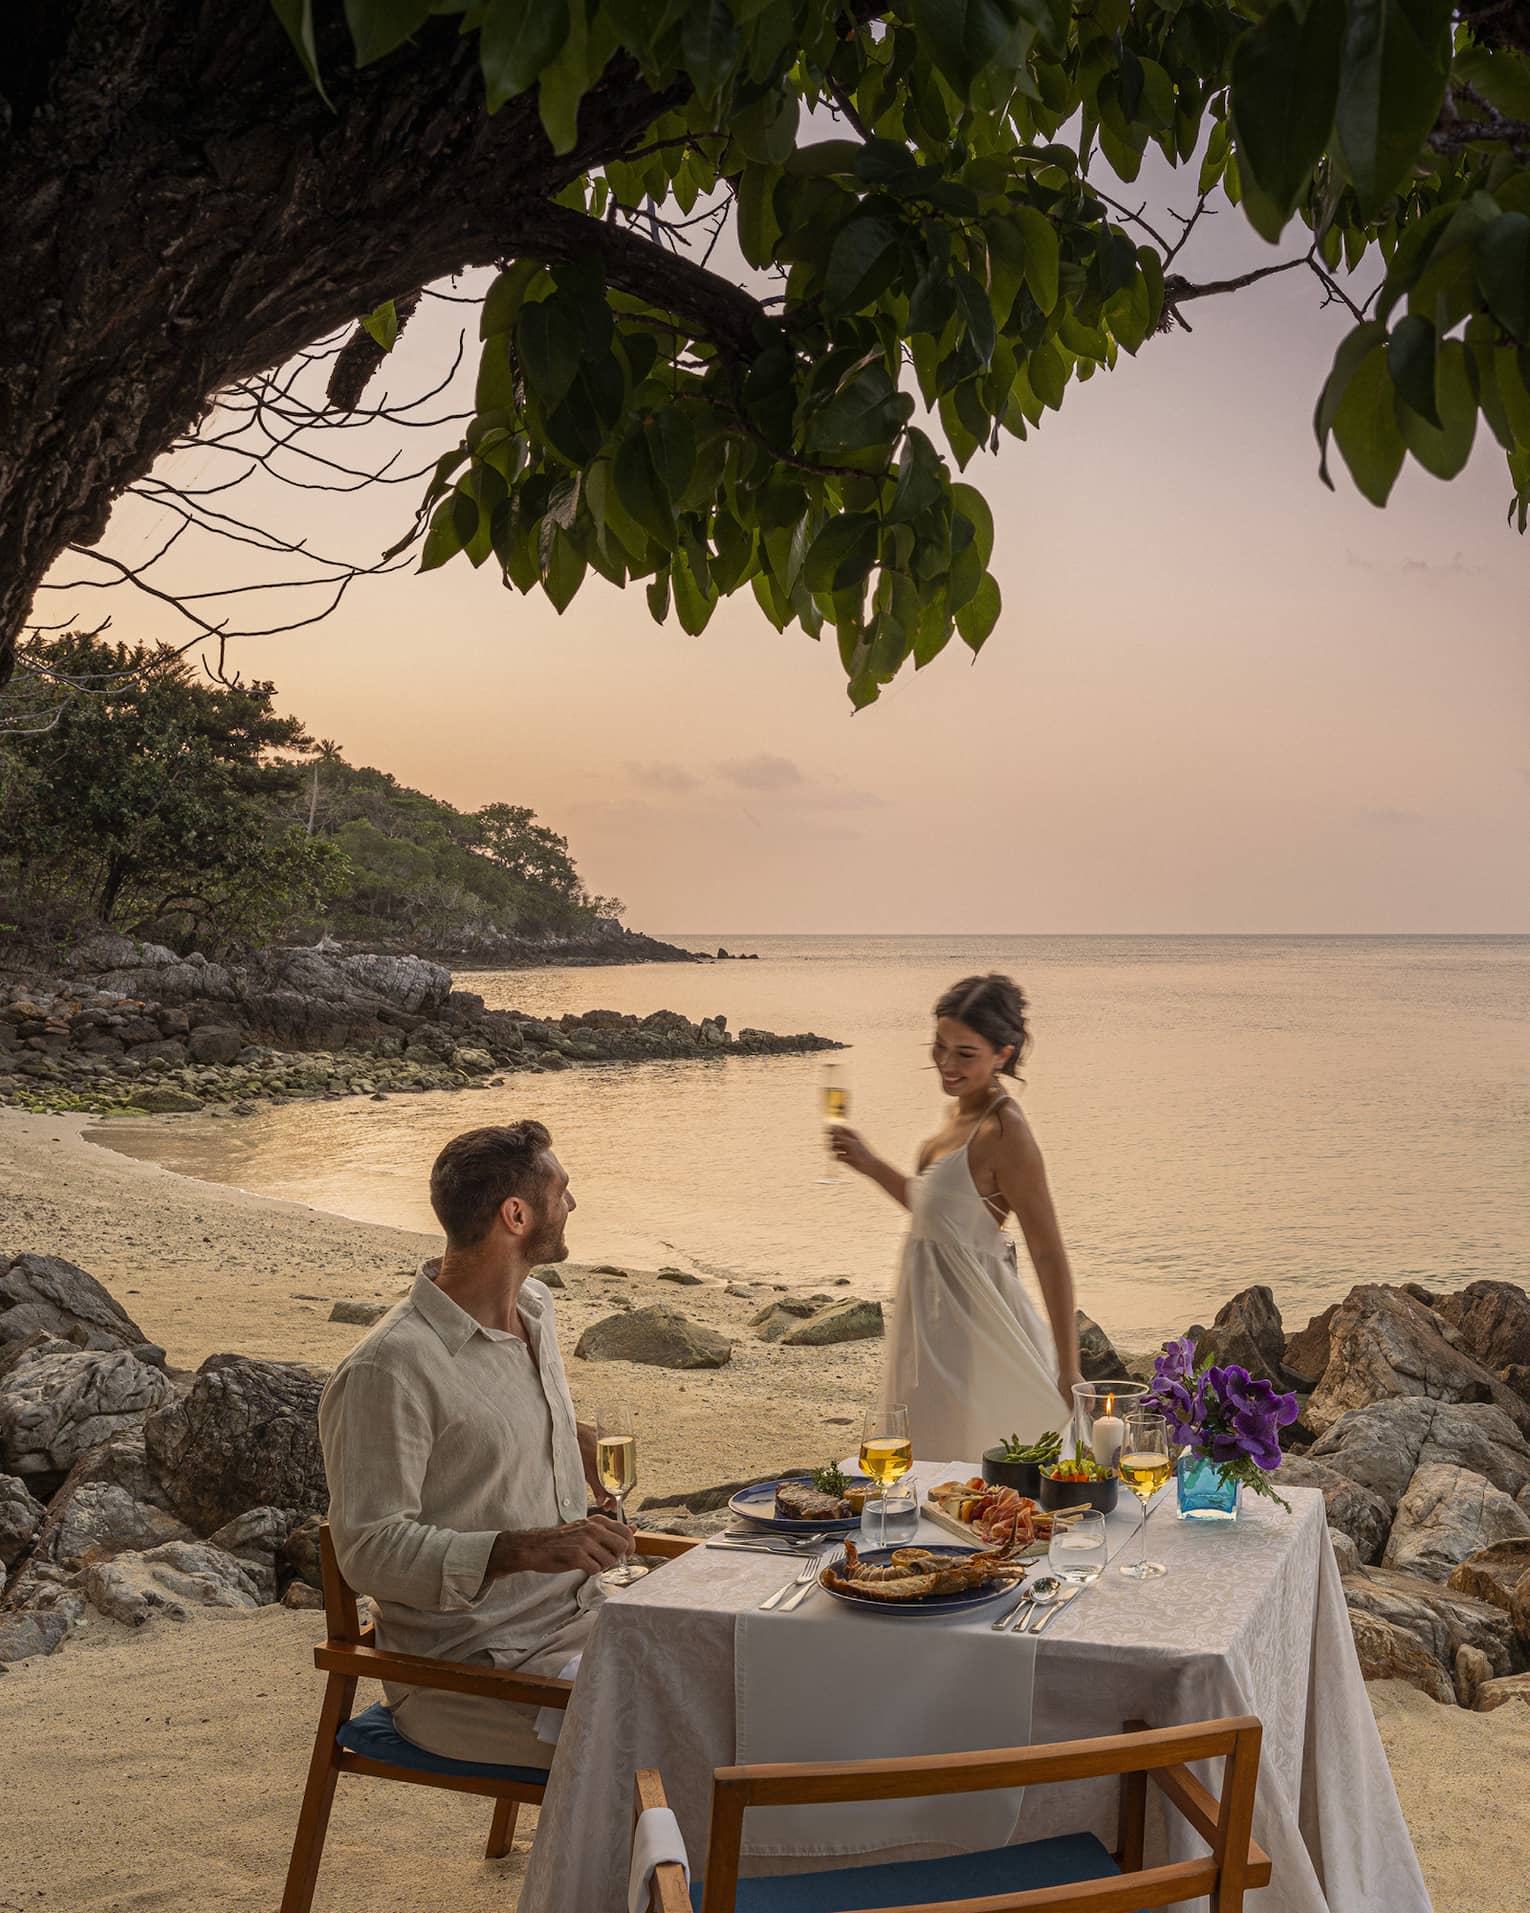 A beach dinner date at dusk, with a couple enjoying a serene seaside view.